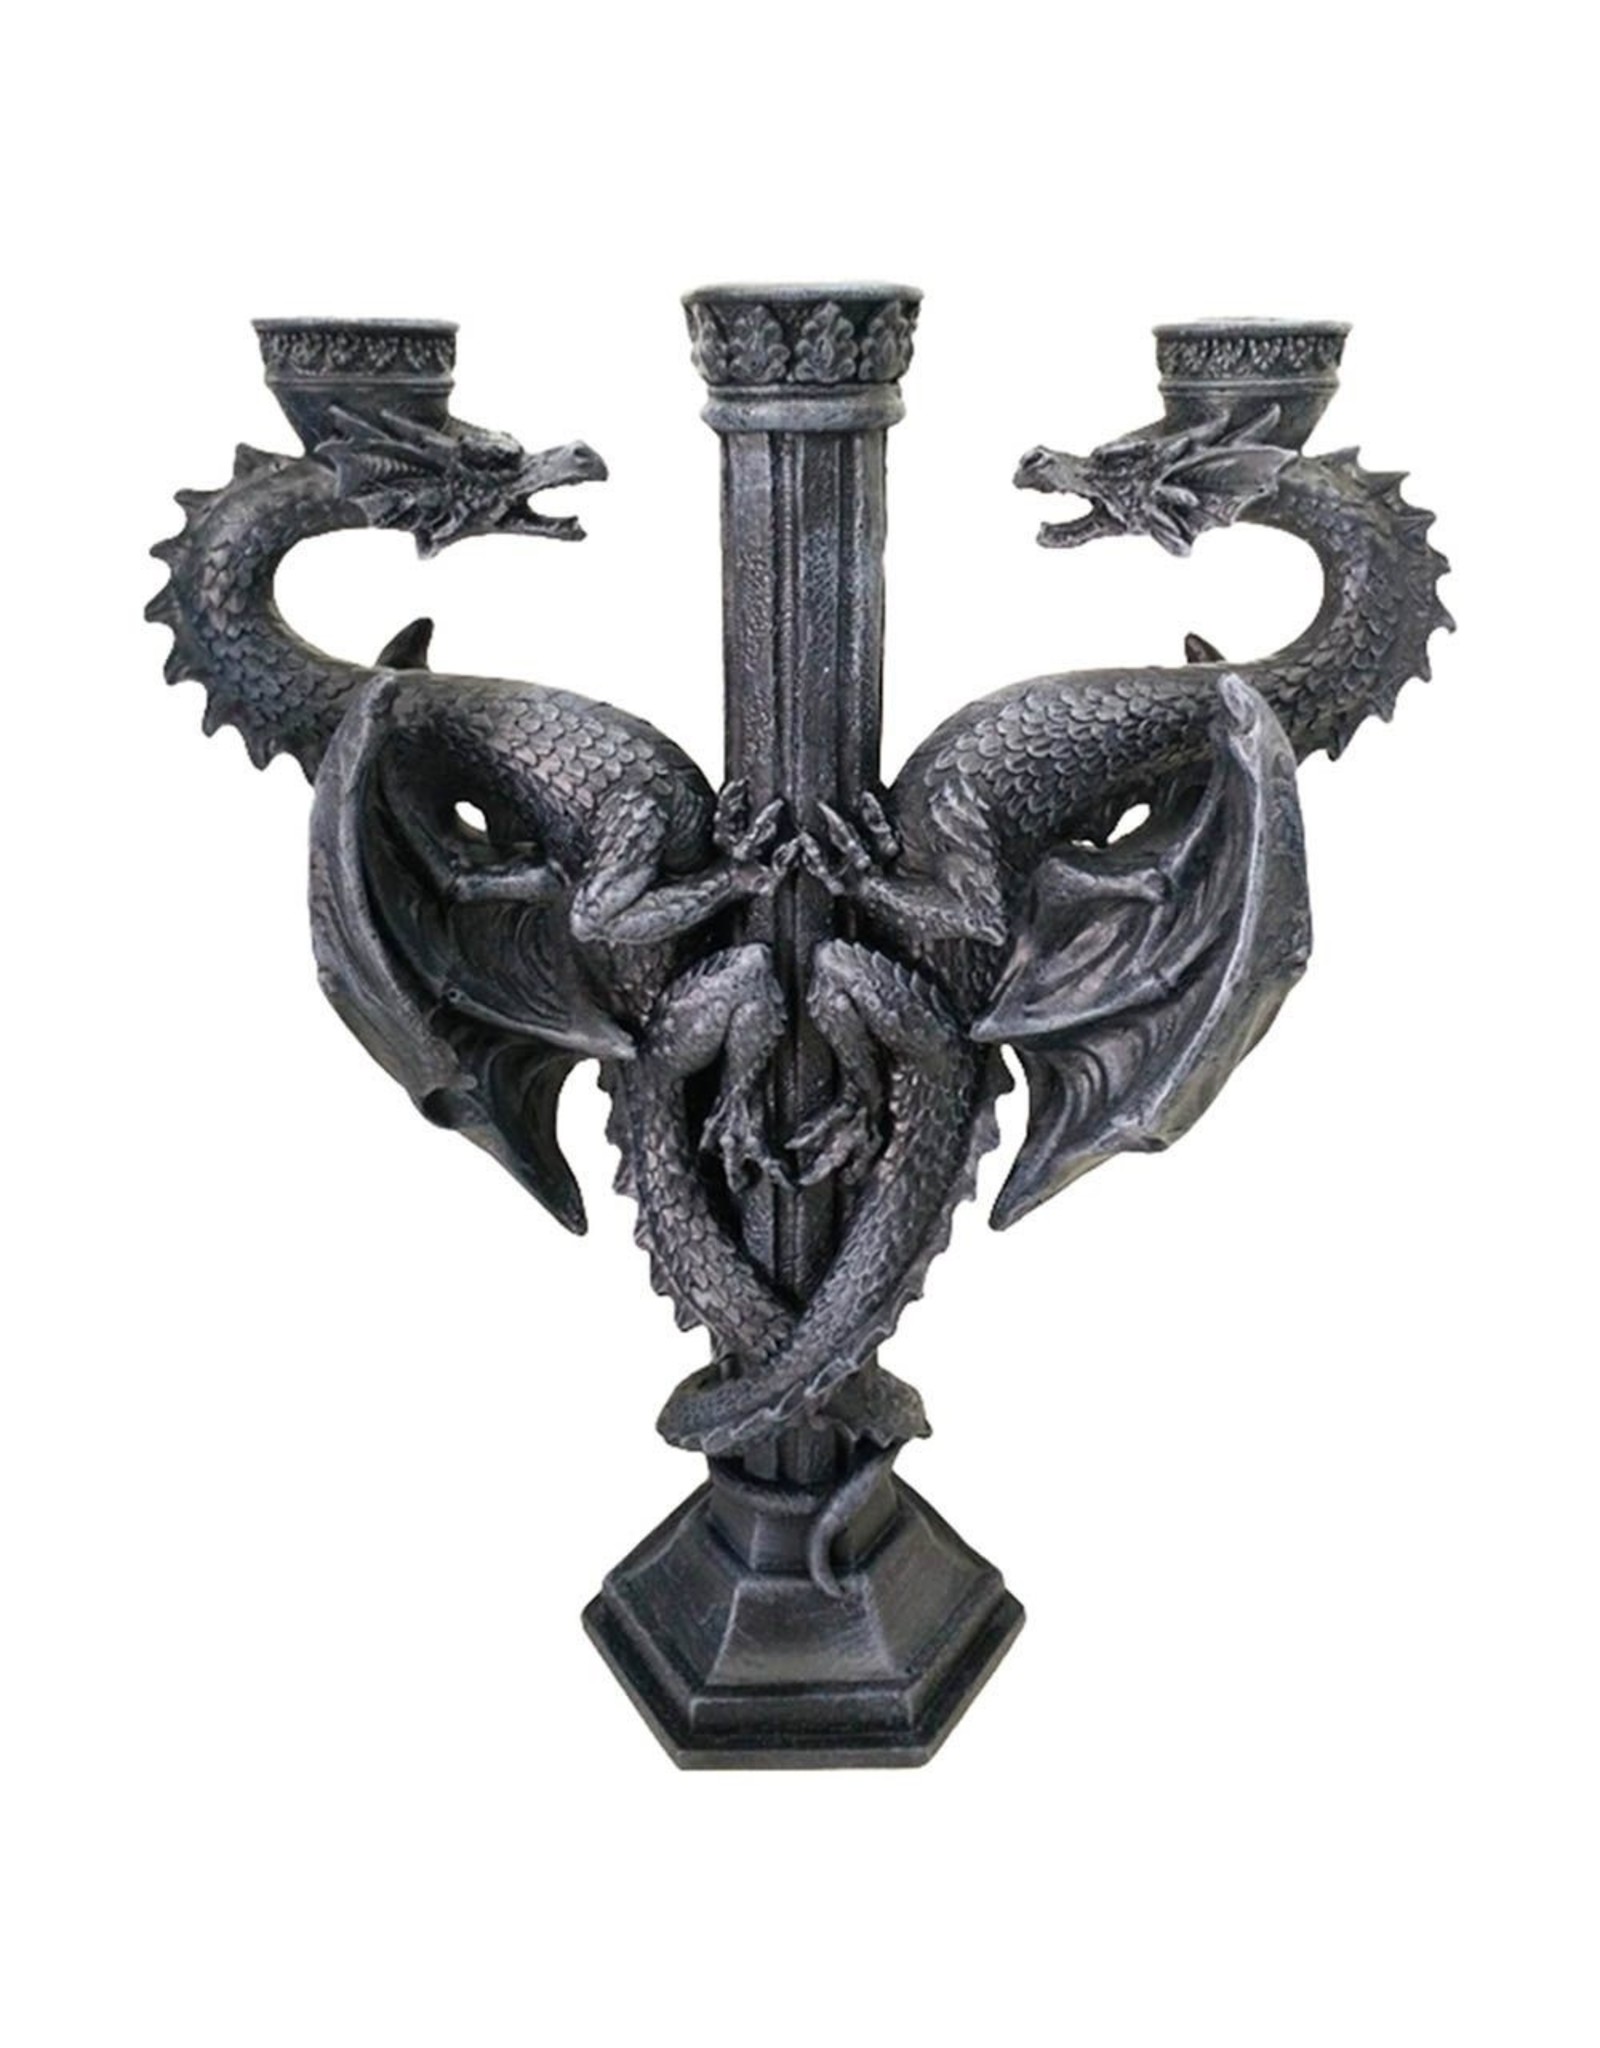 NemesisNow Giftware, figurines, collectables - Dragon's Altar candelabra by Nemesis Now